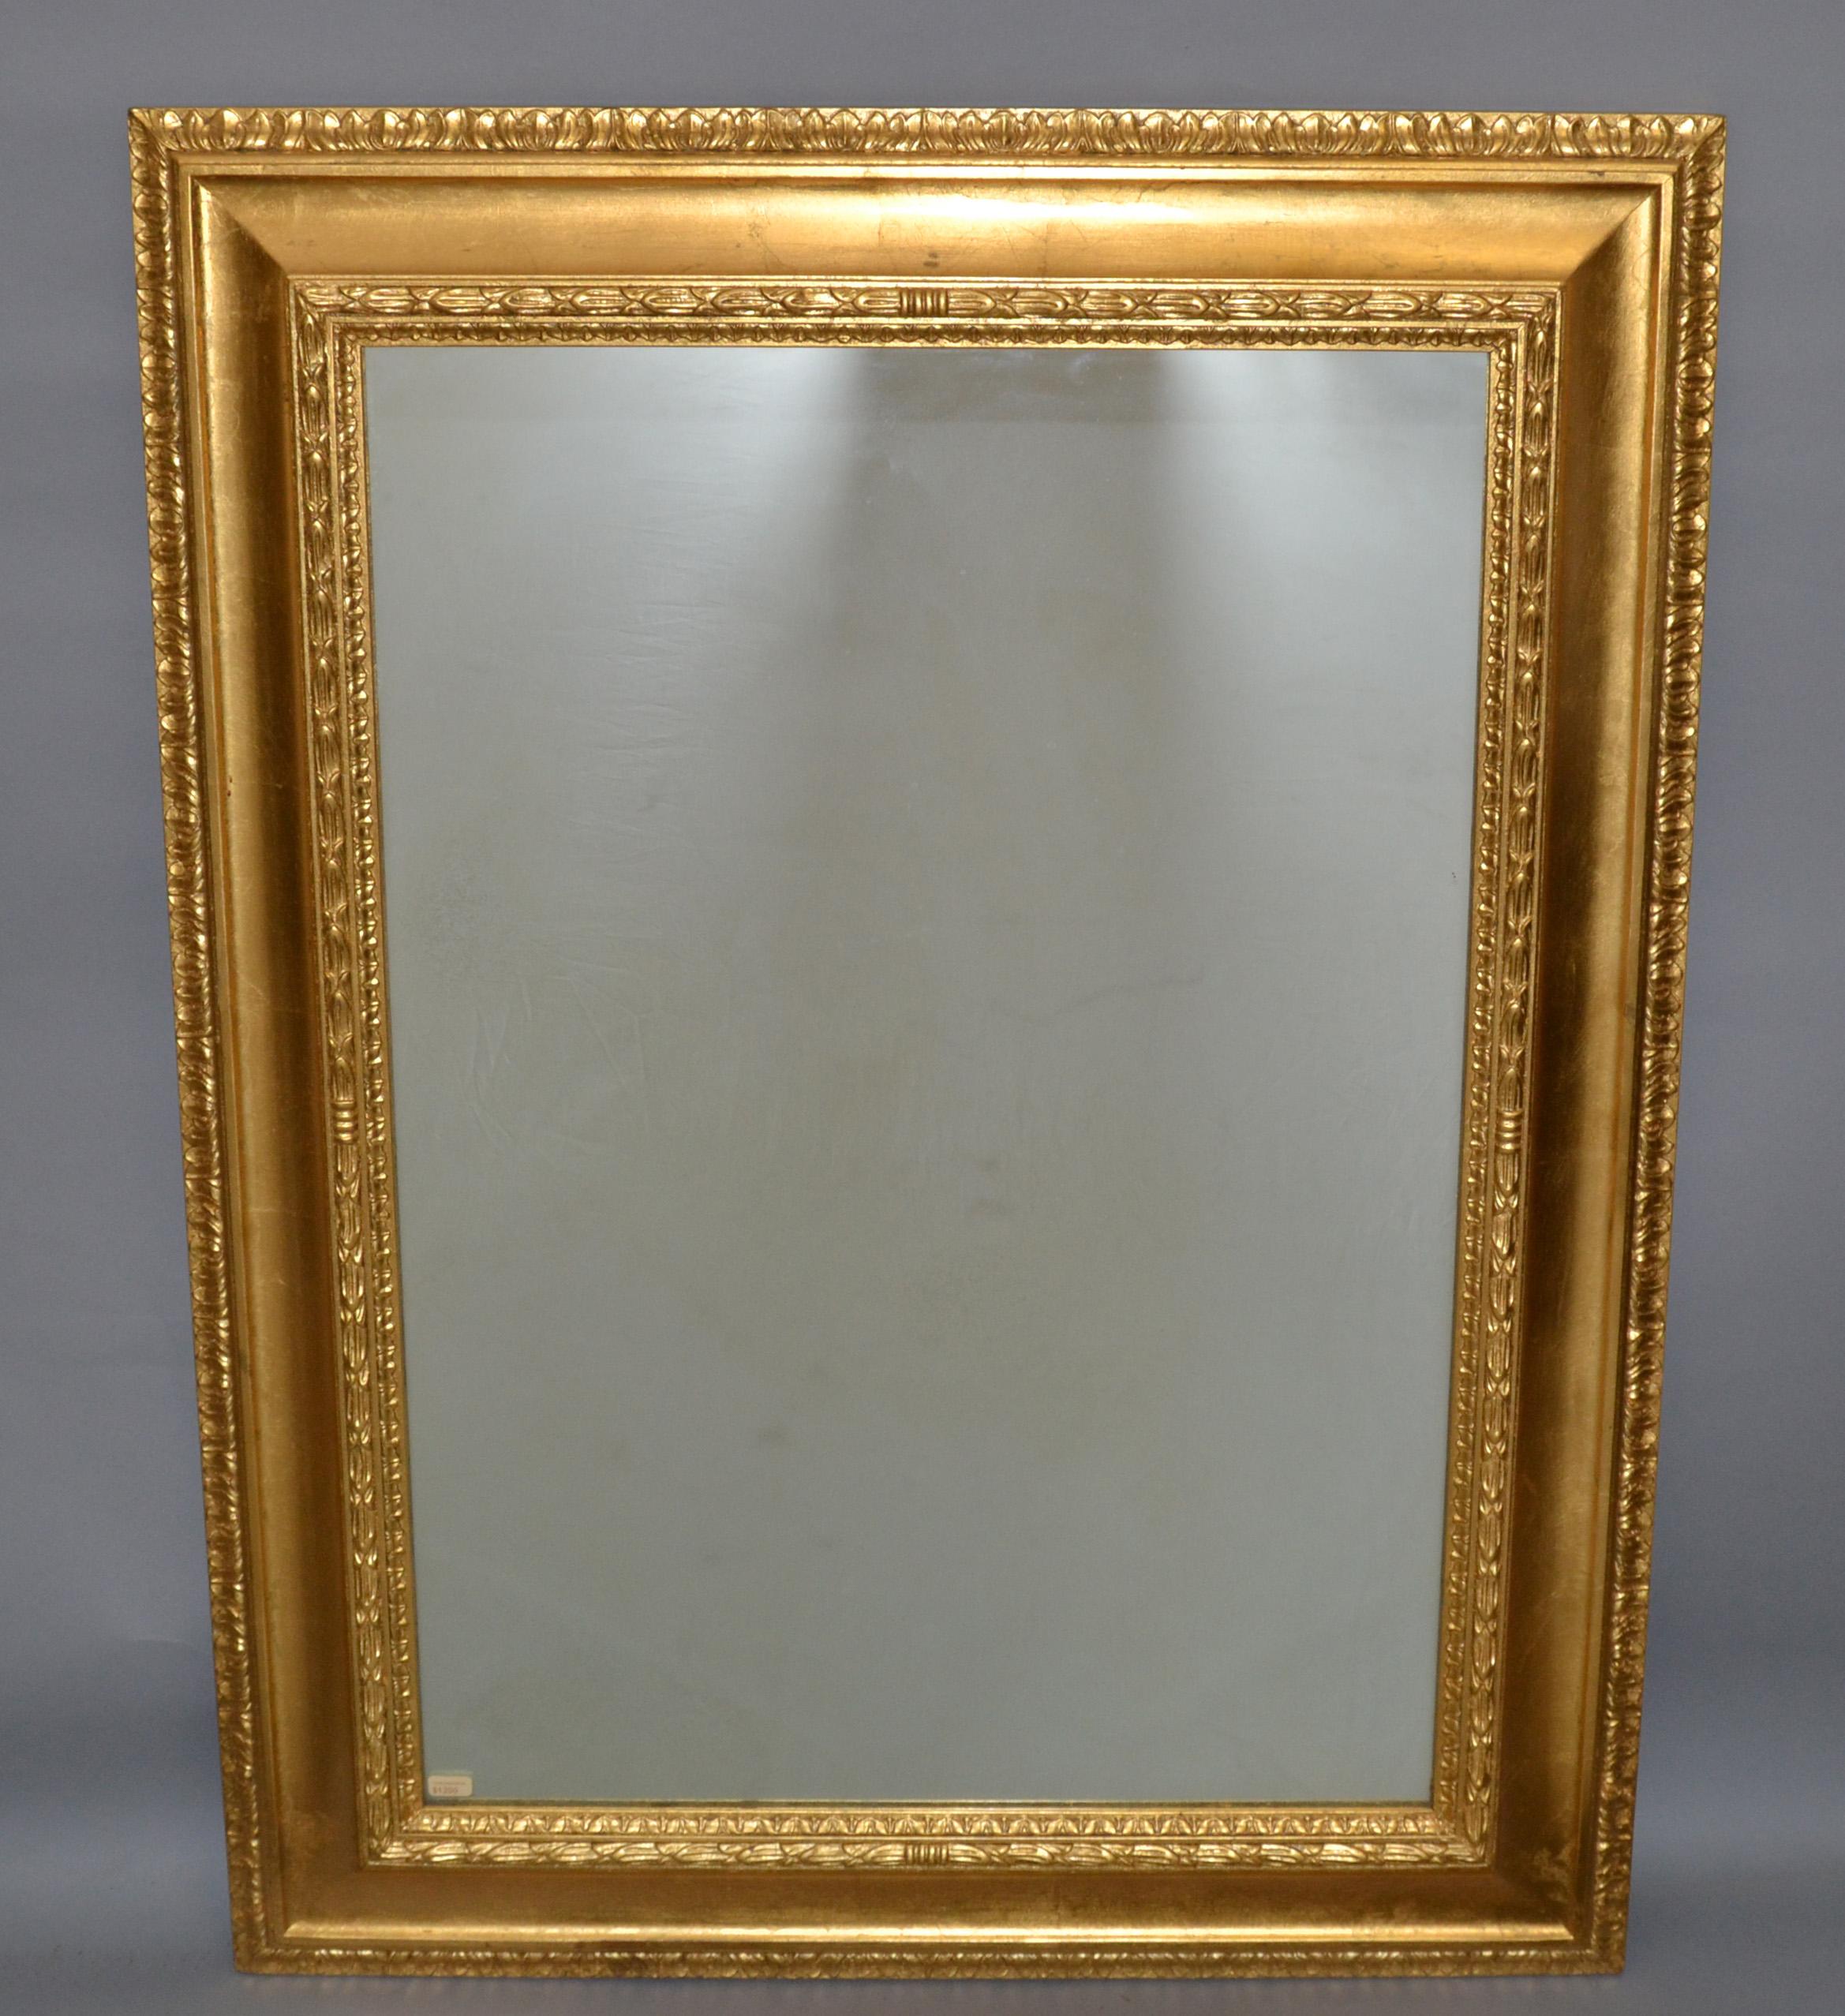 20th Century Italian Neoclassical Regency Rectangle Gilded Wall Mirror, 1930s For Sale